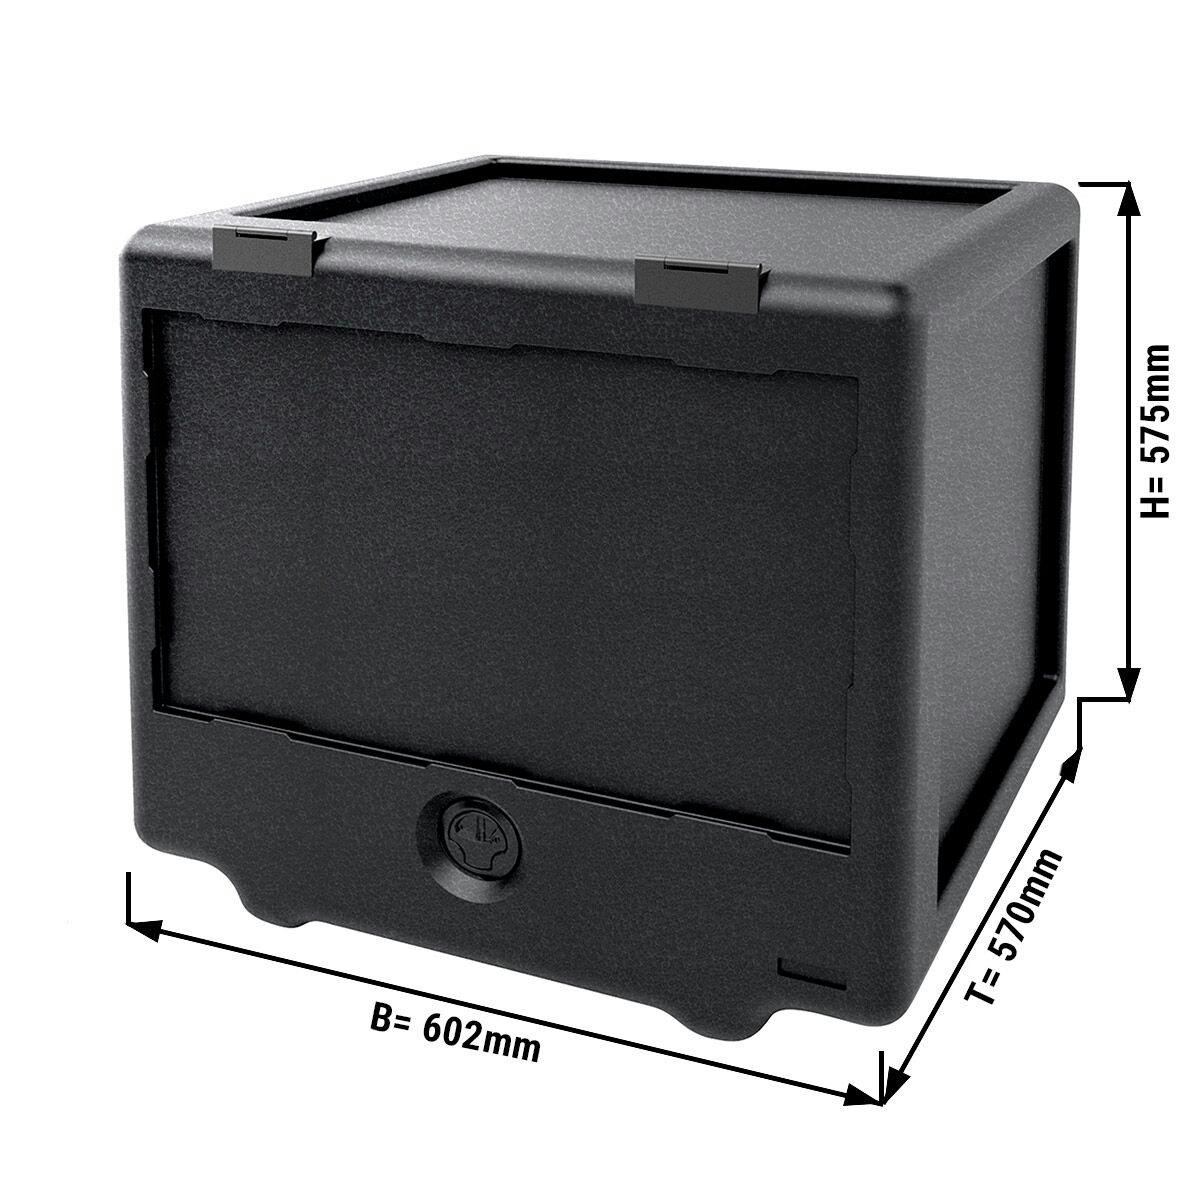 Thermobox front loader | Delivery box for couriers | Styrofoam box | Polibox - 100 litres	